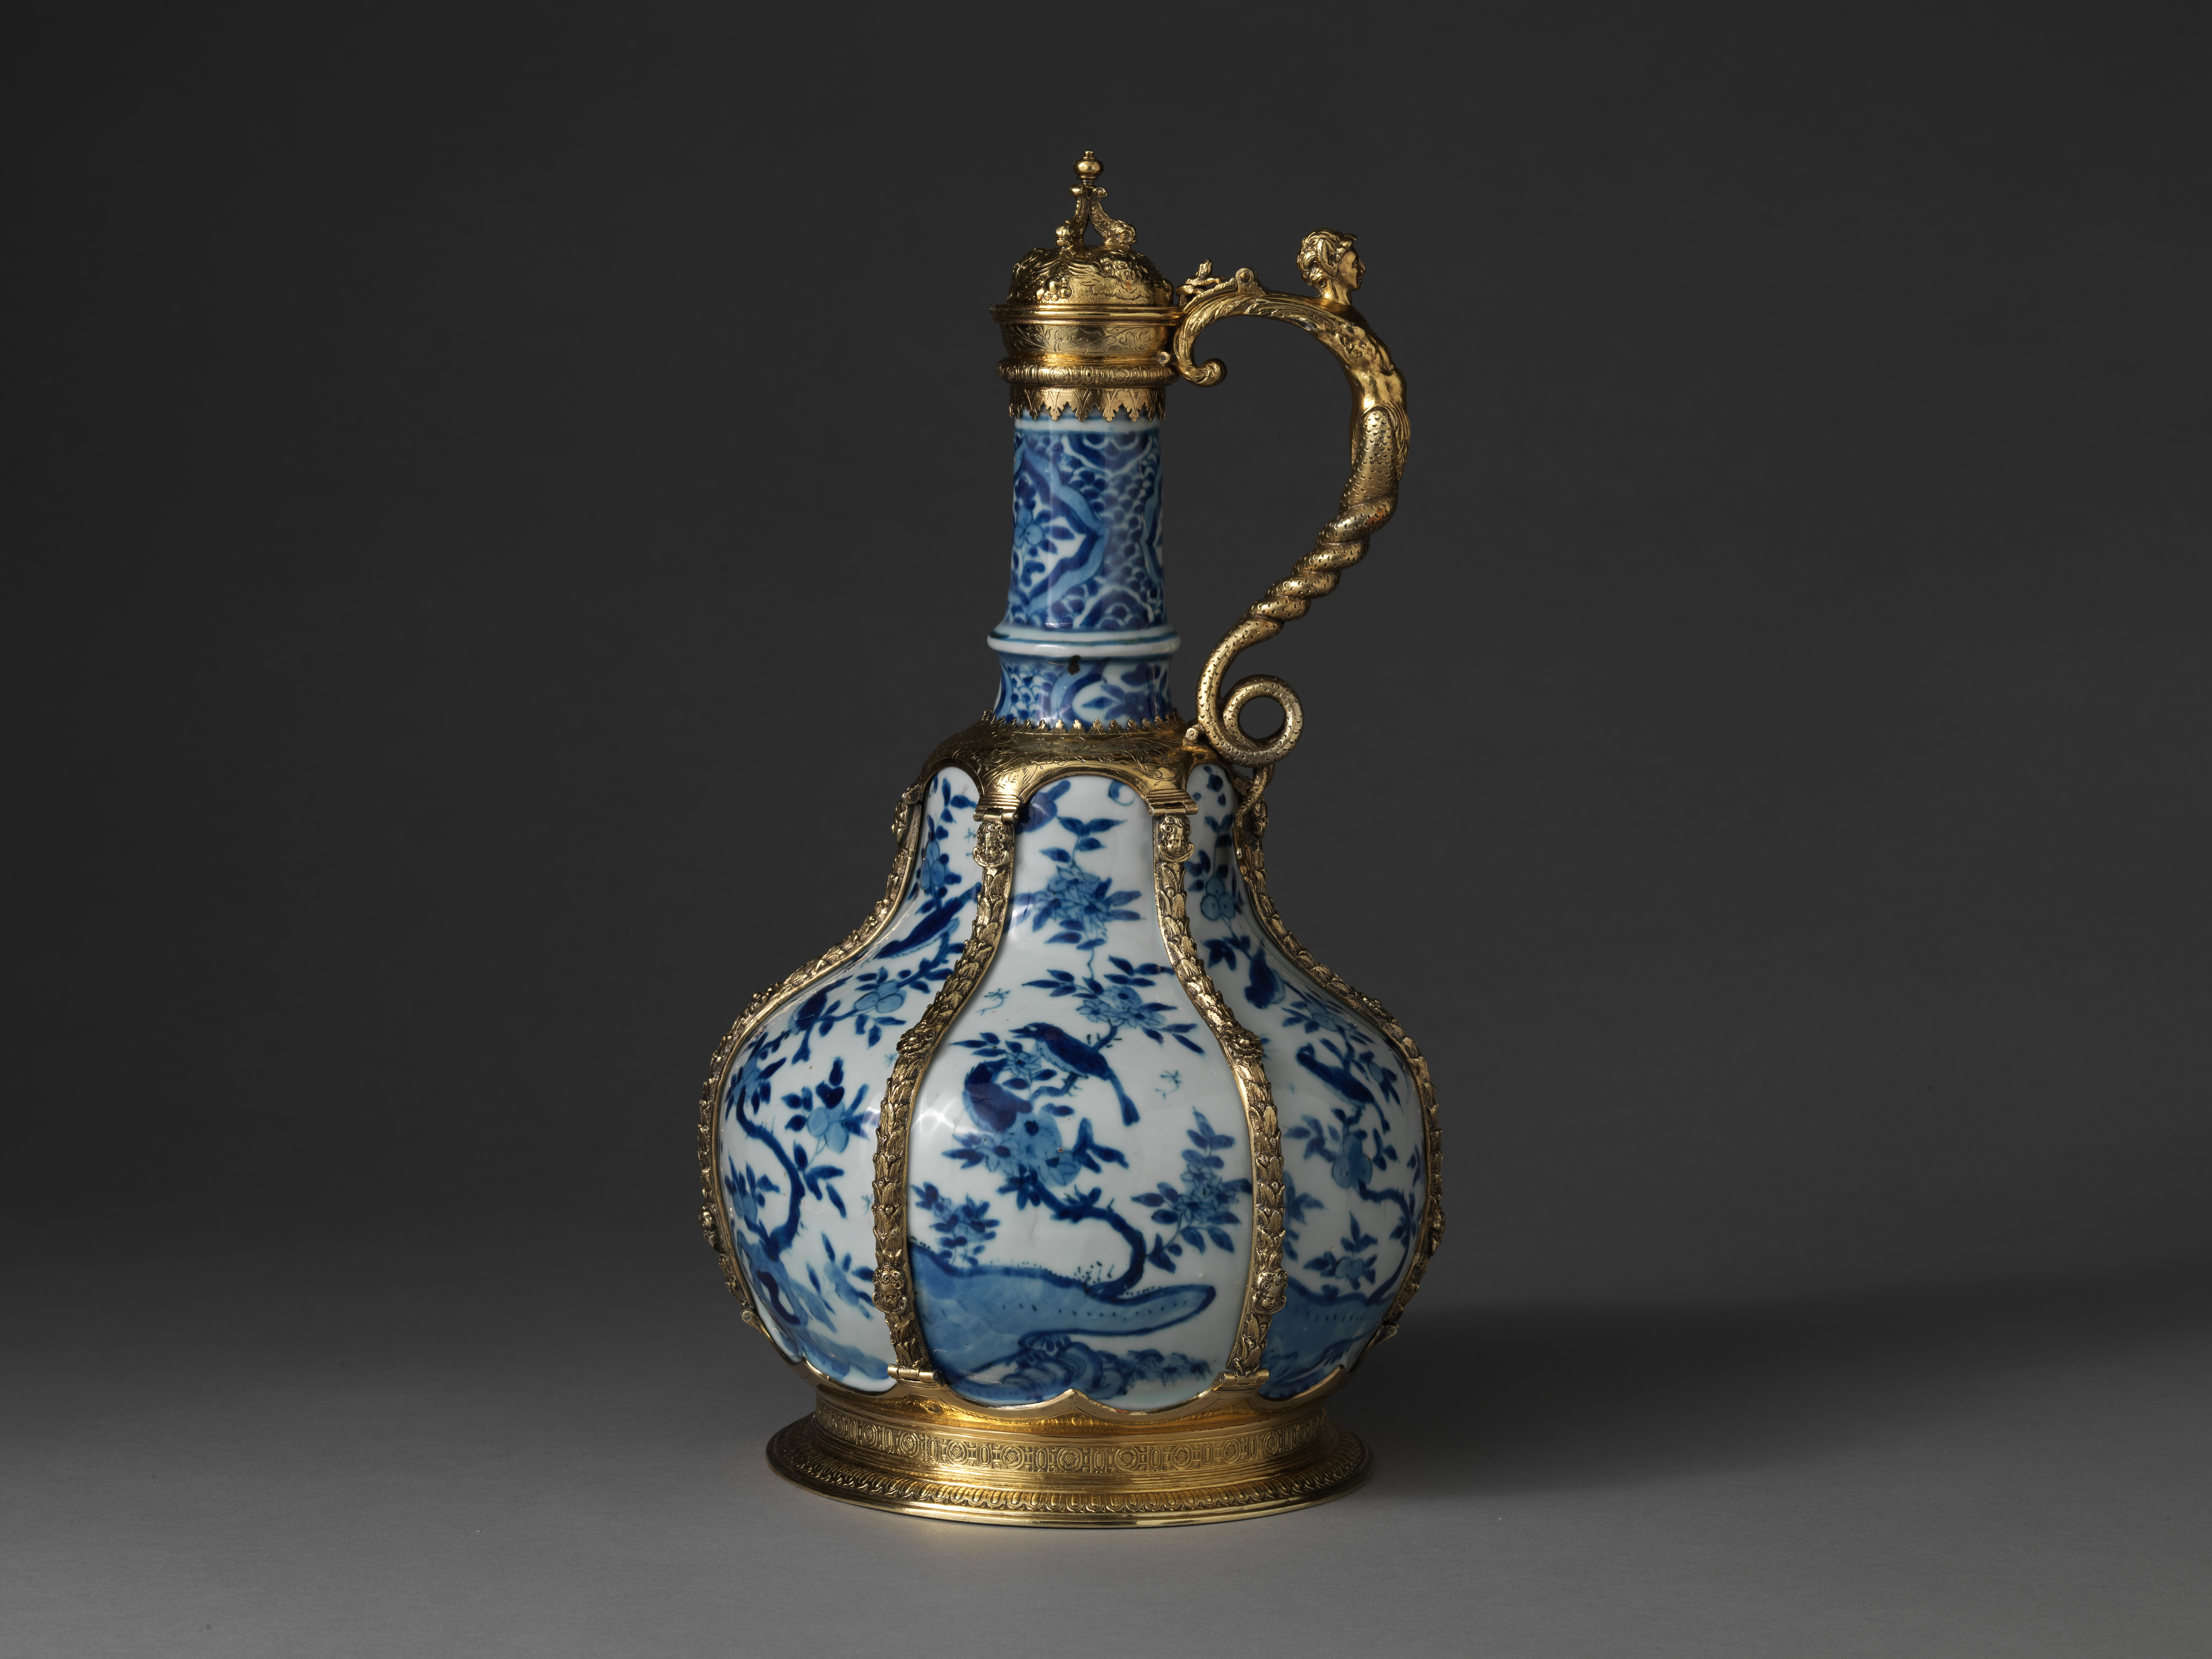 Ewer from Burghley House, Lincolnshire. Chinese porcelain 1573-circa 1585, British mounts circa 1585. Hard-paste porcelain, gilded silver. Height: 13 5/8in. (34.6cm). The Metropolitan Museum of Art, New York, Rogers Fund, 1944 (44.14.2) 